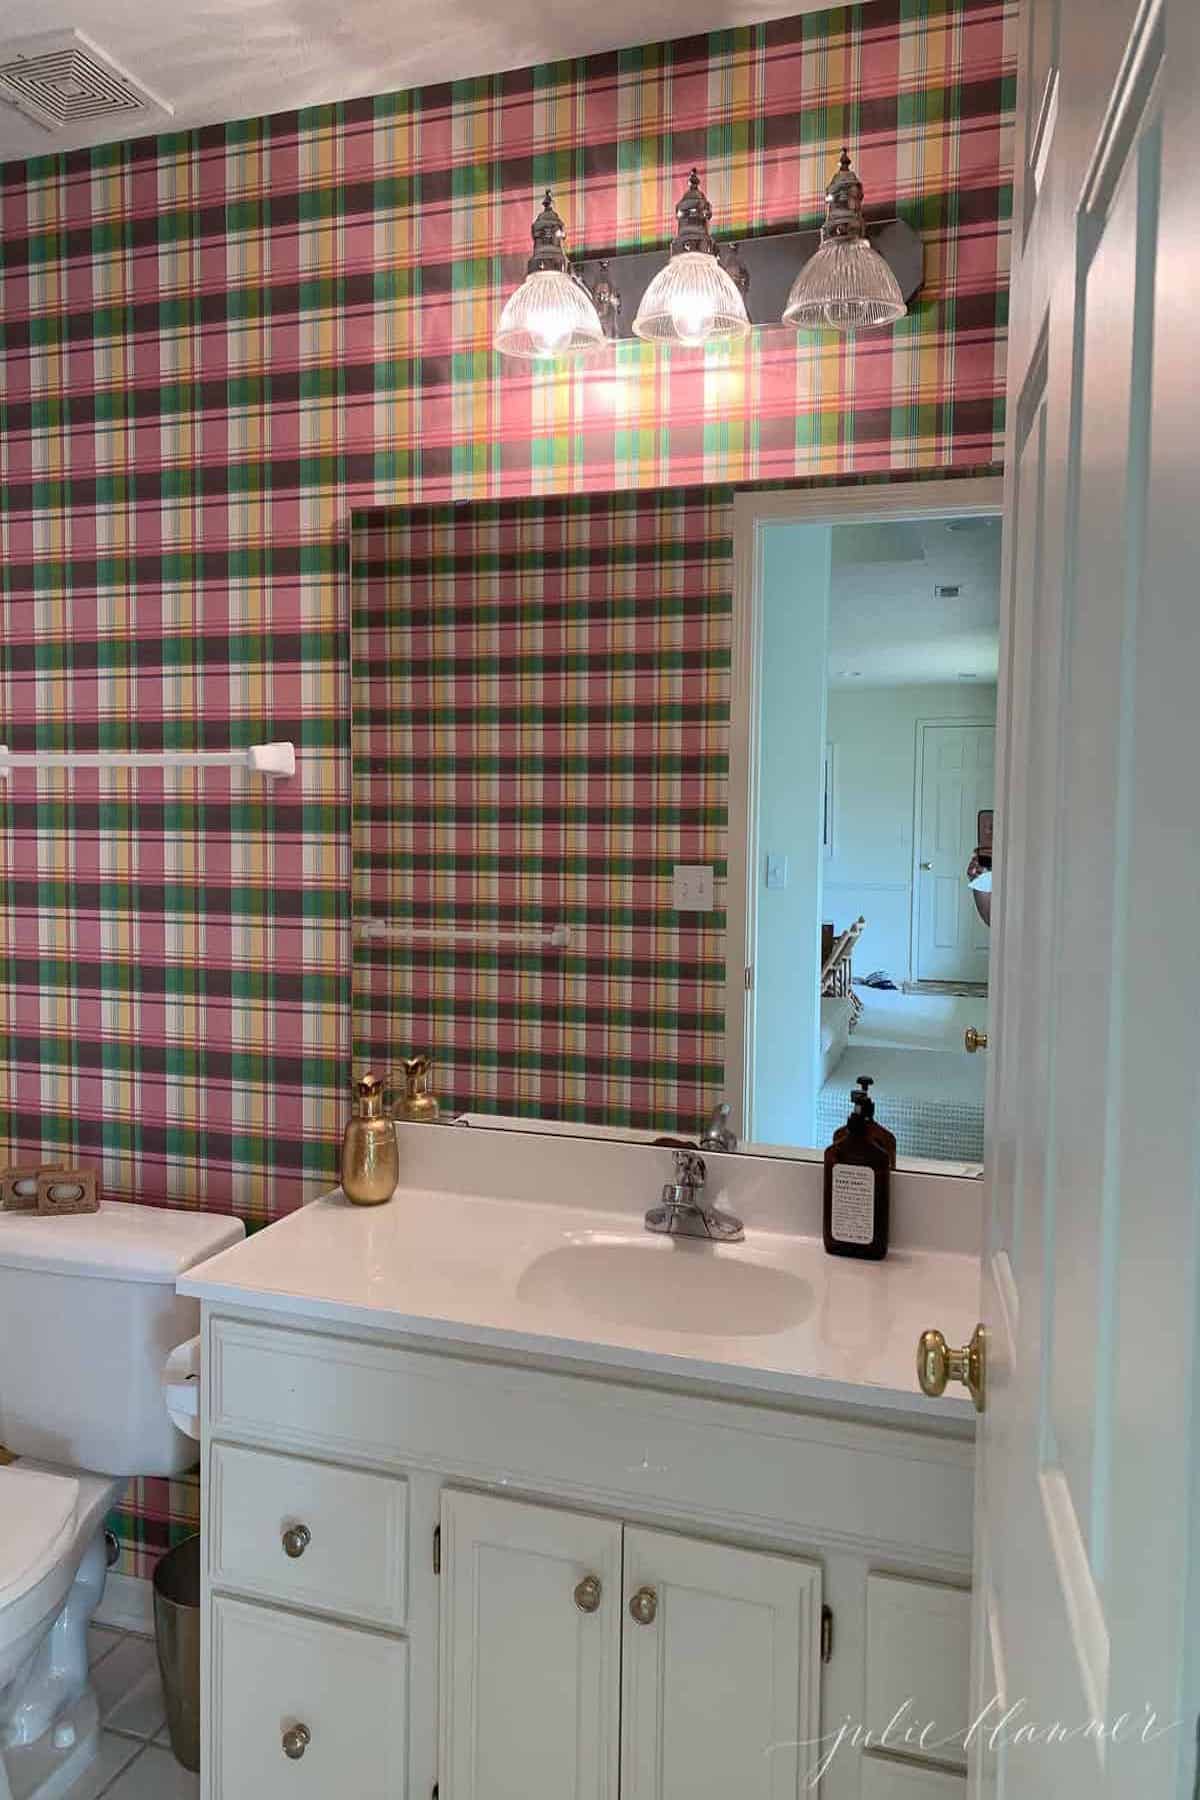 A bathroom with a nautical-themed pink and white checkered wallpaper.